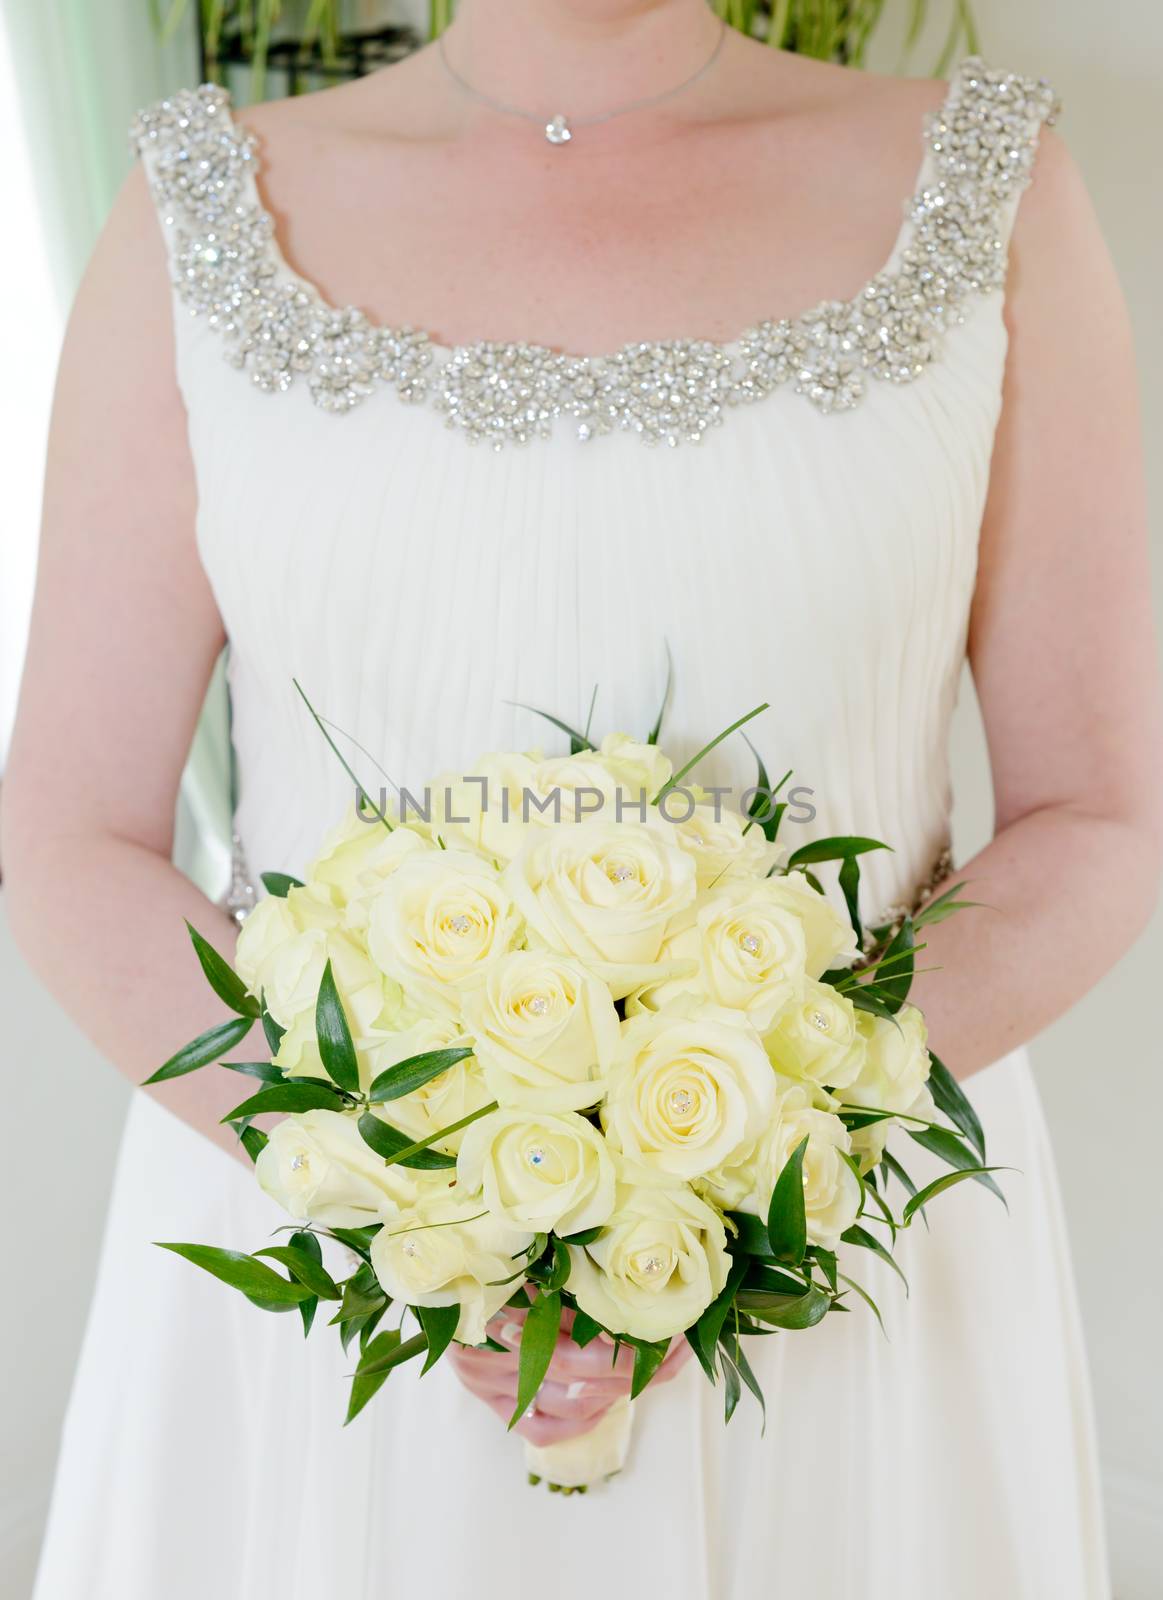 Closeup of bride holding flower arrangement with yellow roses